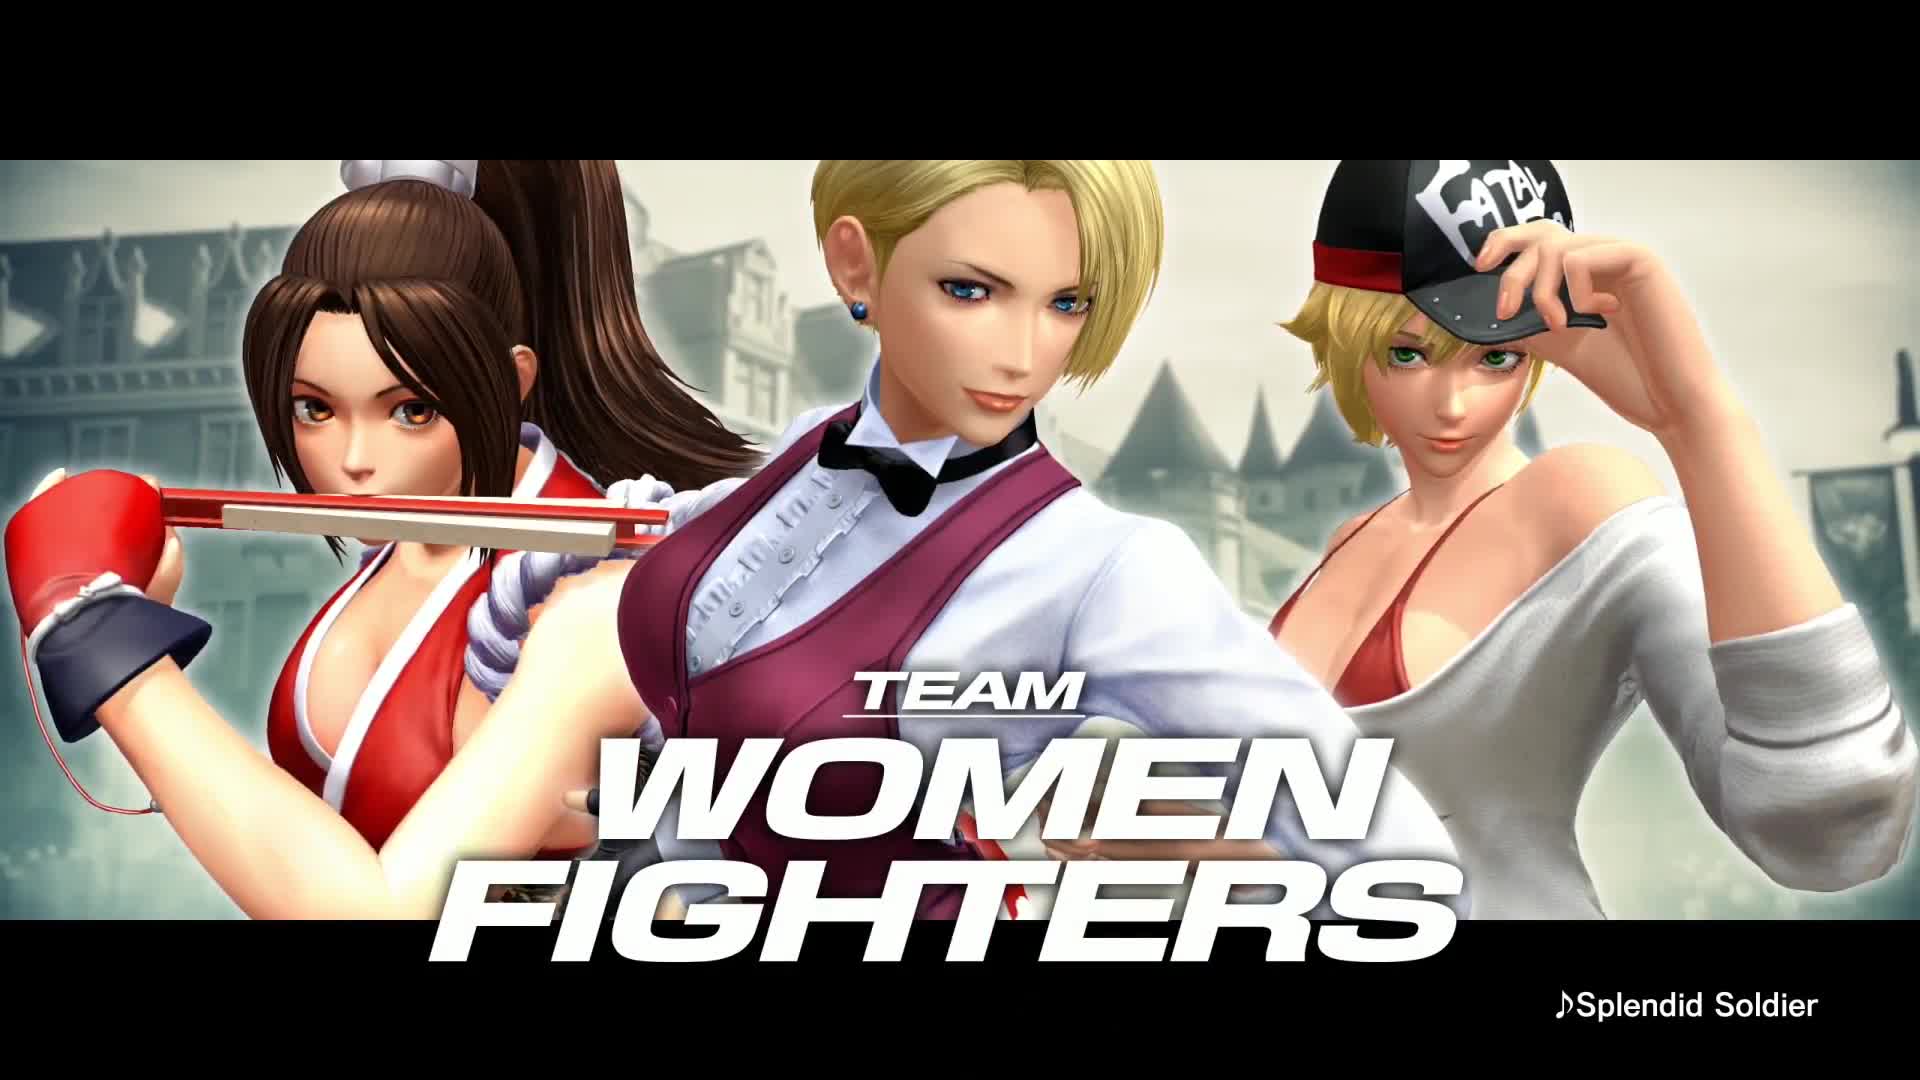 King of Fighters XIV - Women fighters